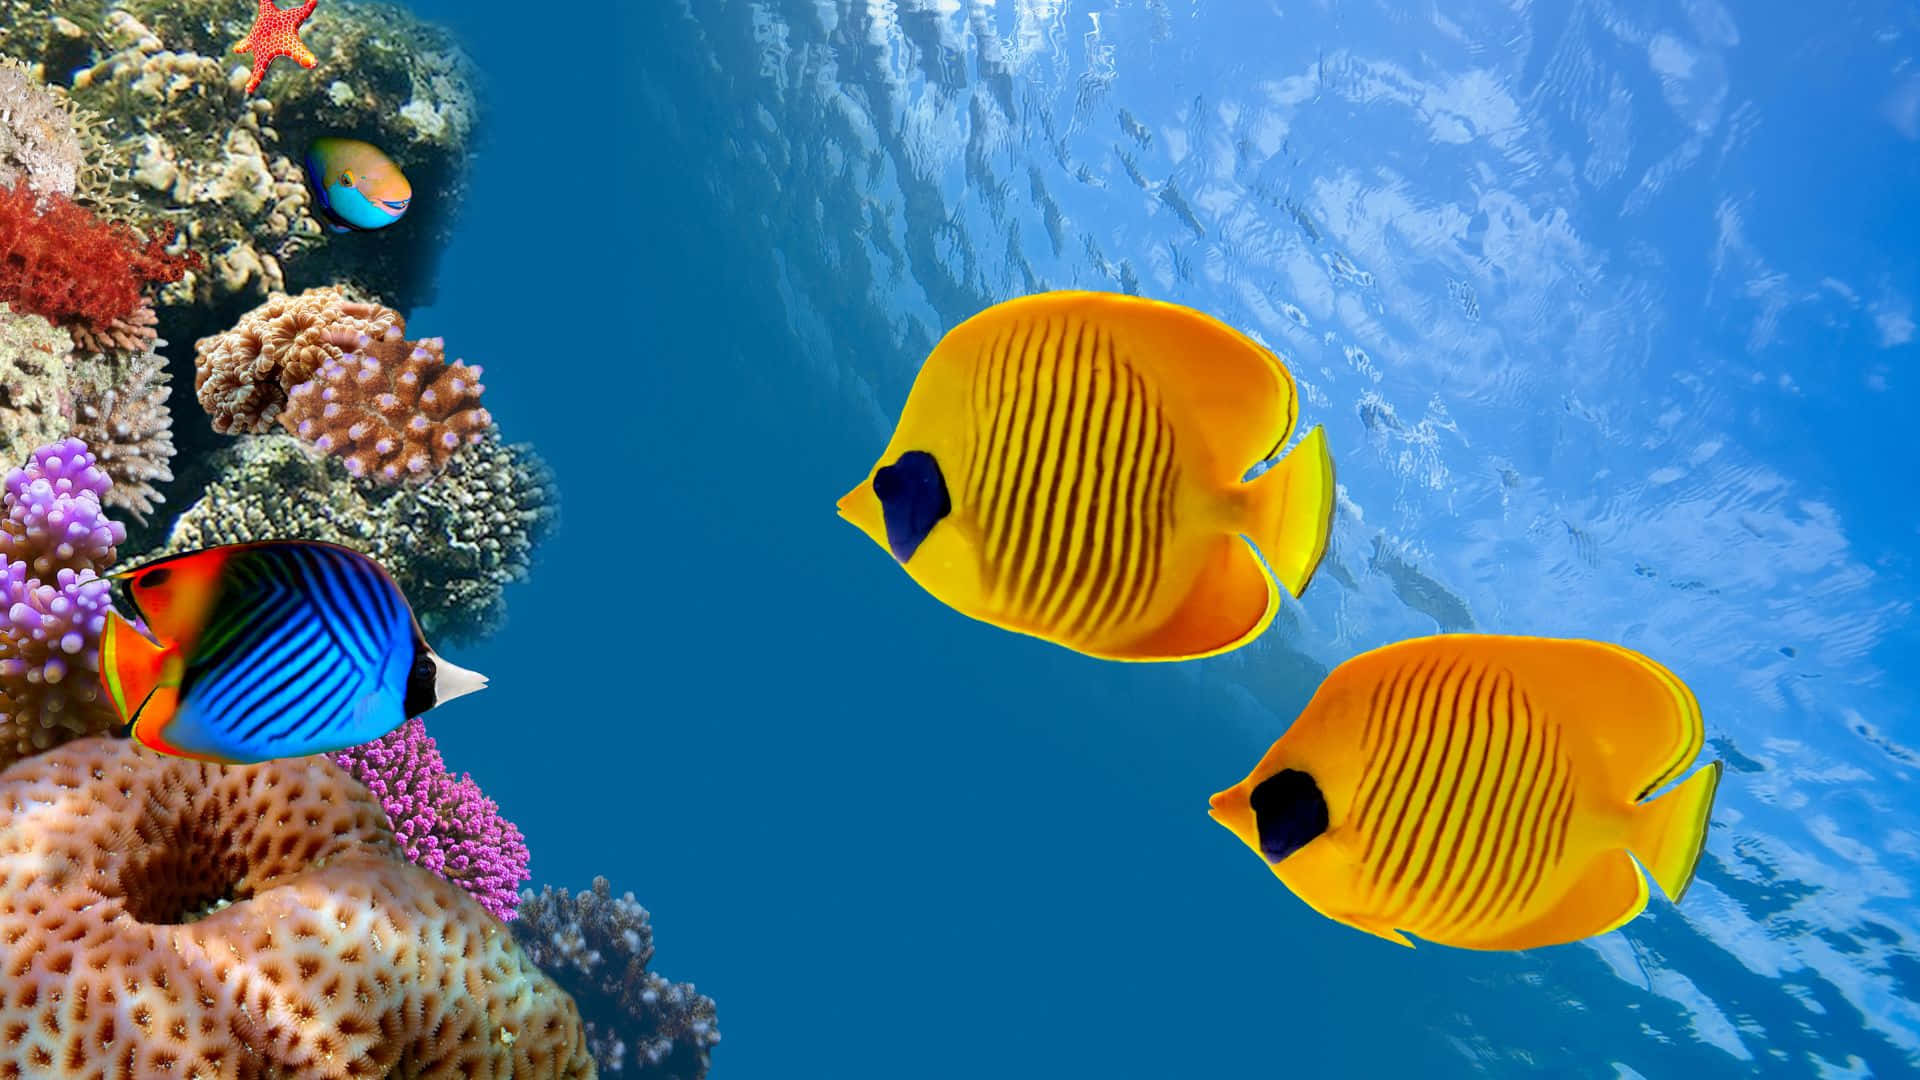 A Vibrant Butterflyfish Exploring The Underwater World Wallpaper